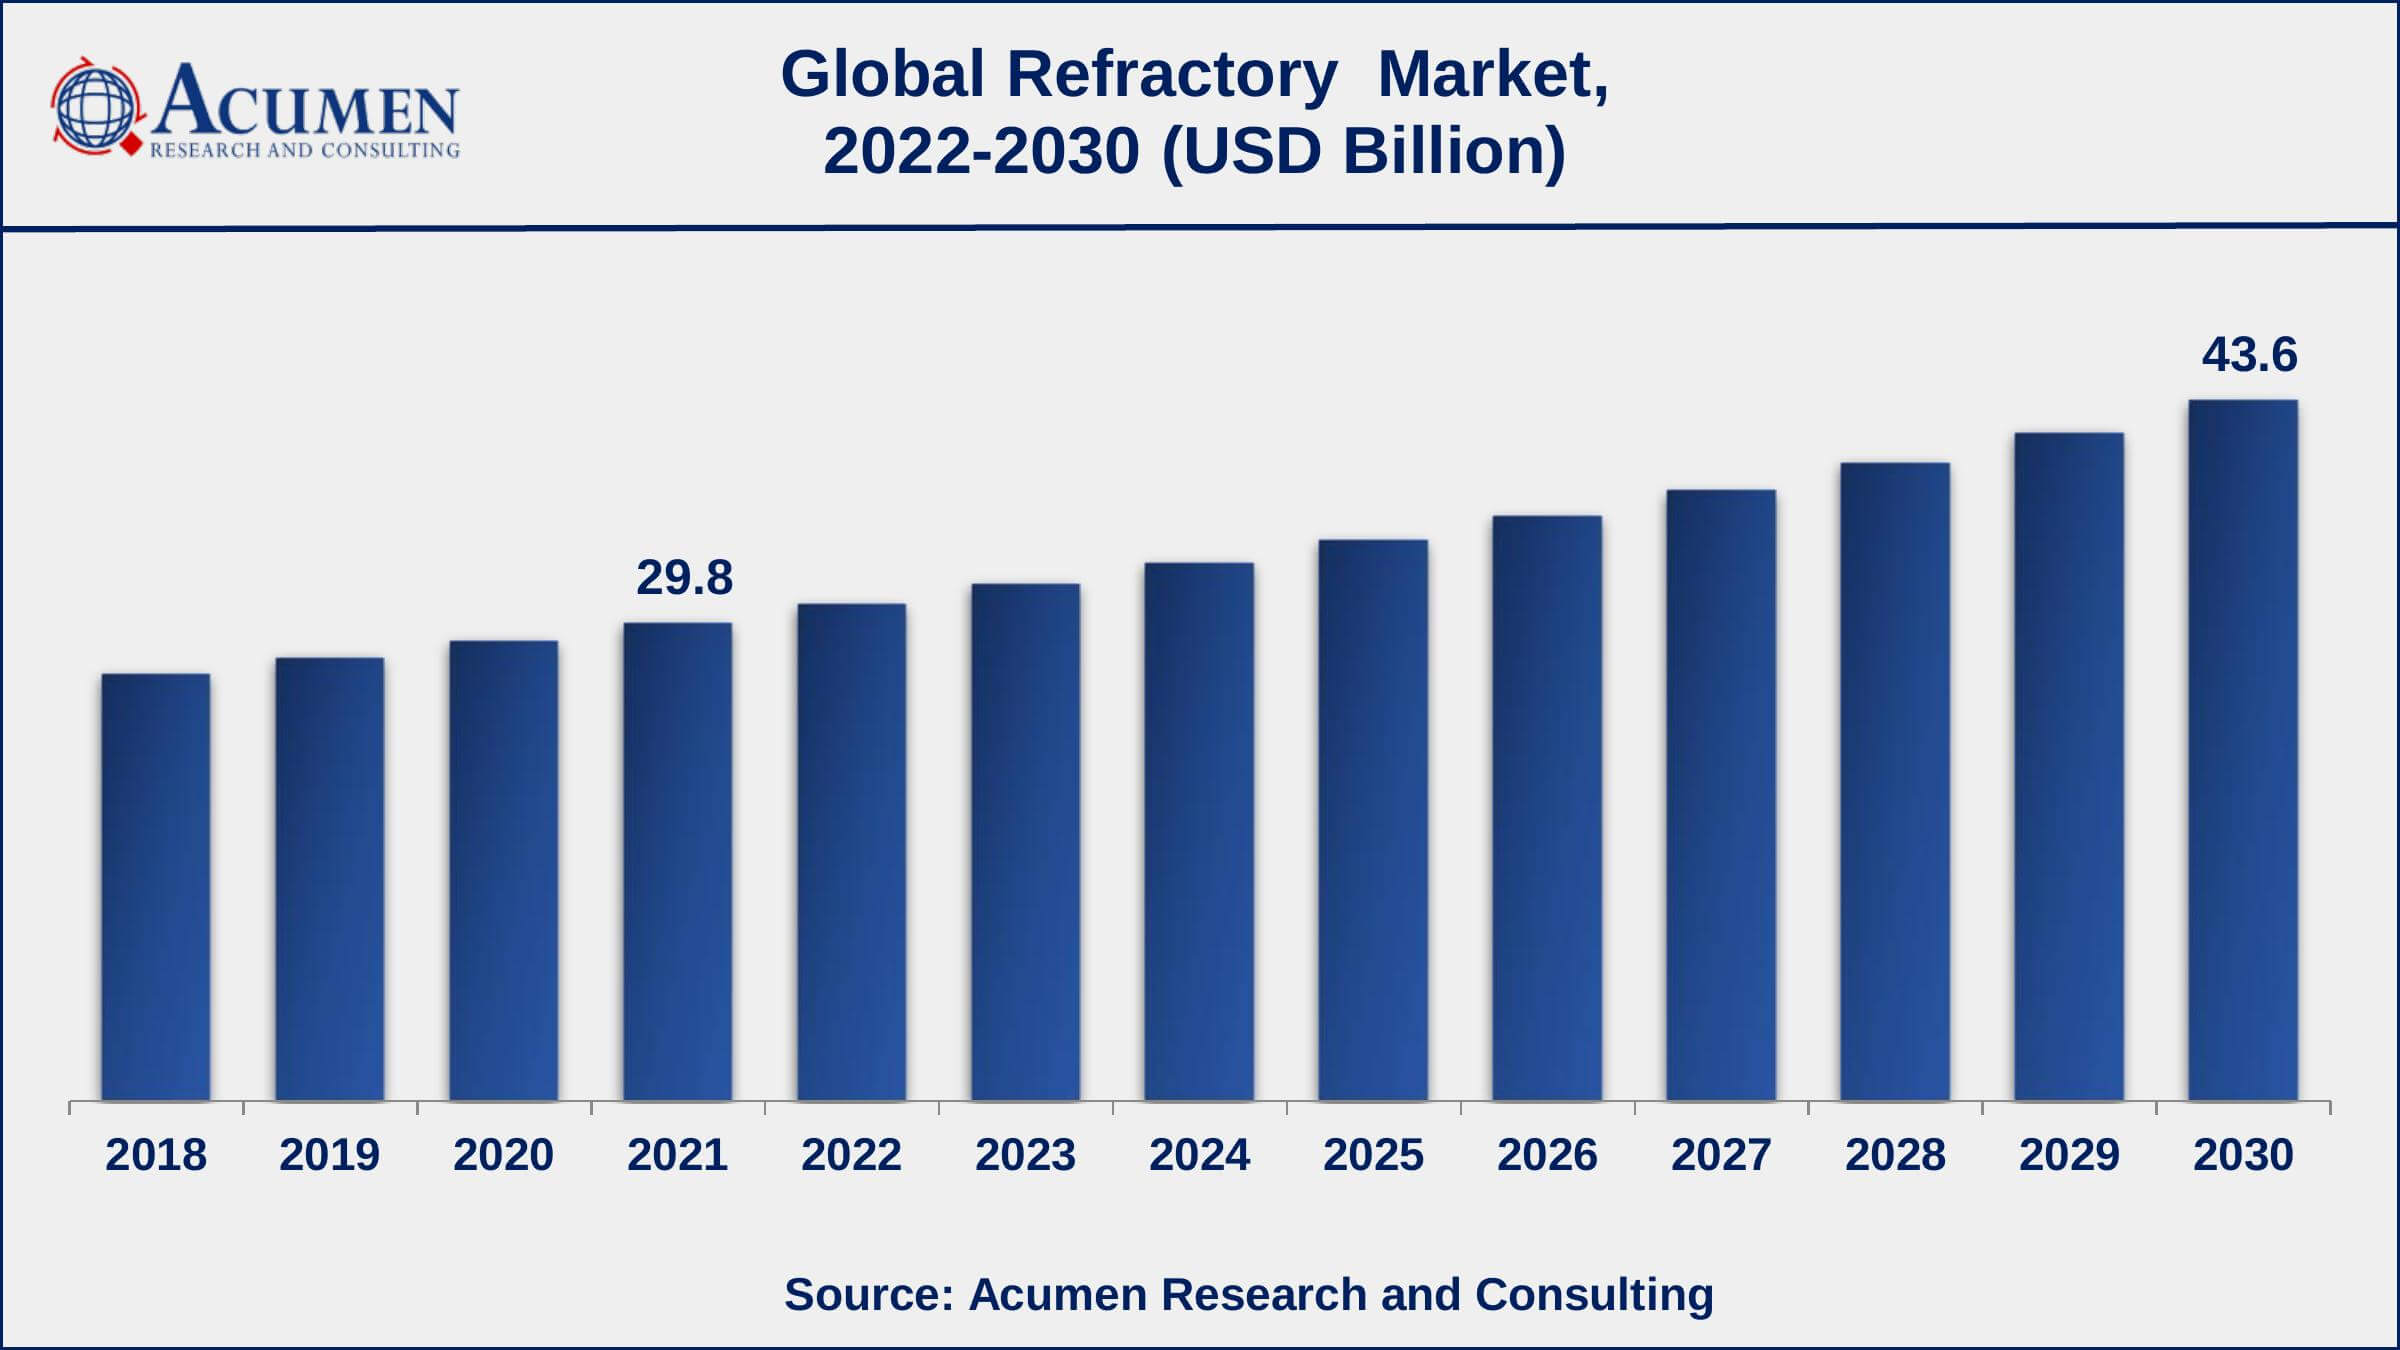 Asia-Pacific refractory market share generated over 30% shares in 2021